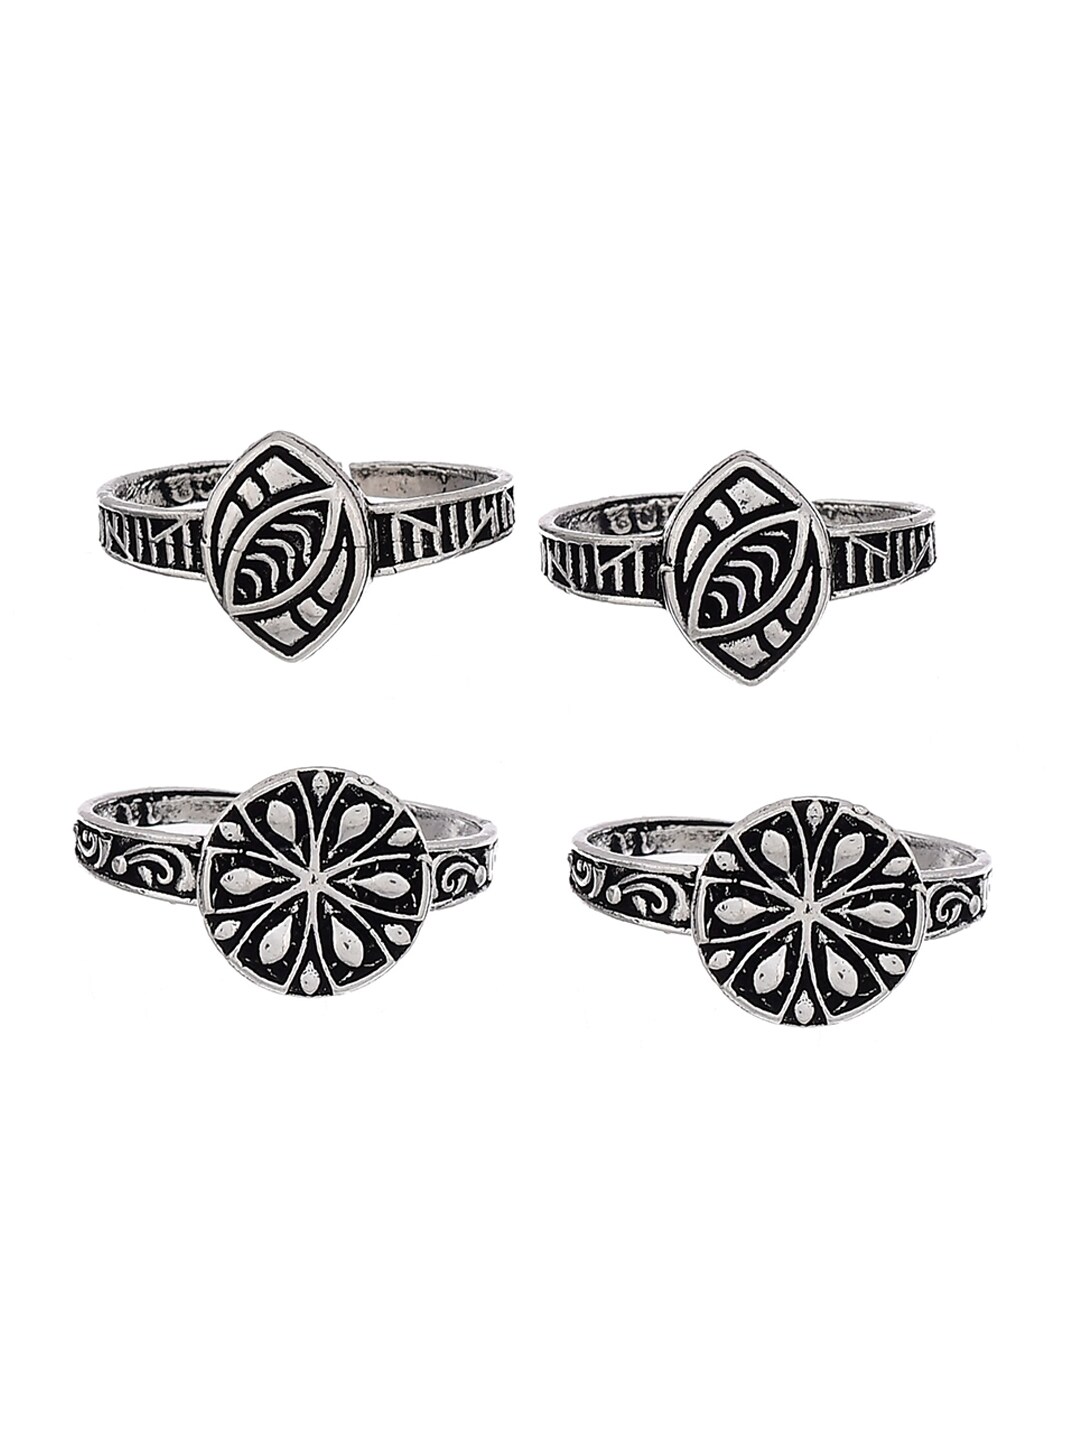 Infuzze Set Of 4 Oxidised Silver-Plated Adjustable Toe Rings Price in India